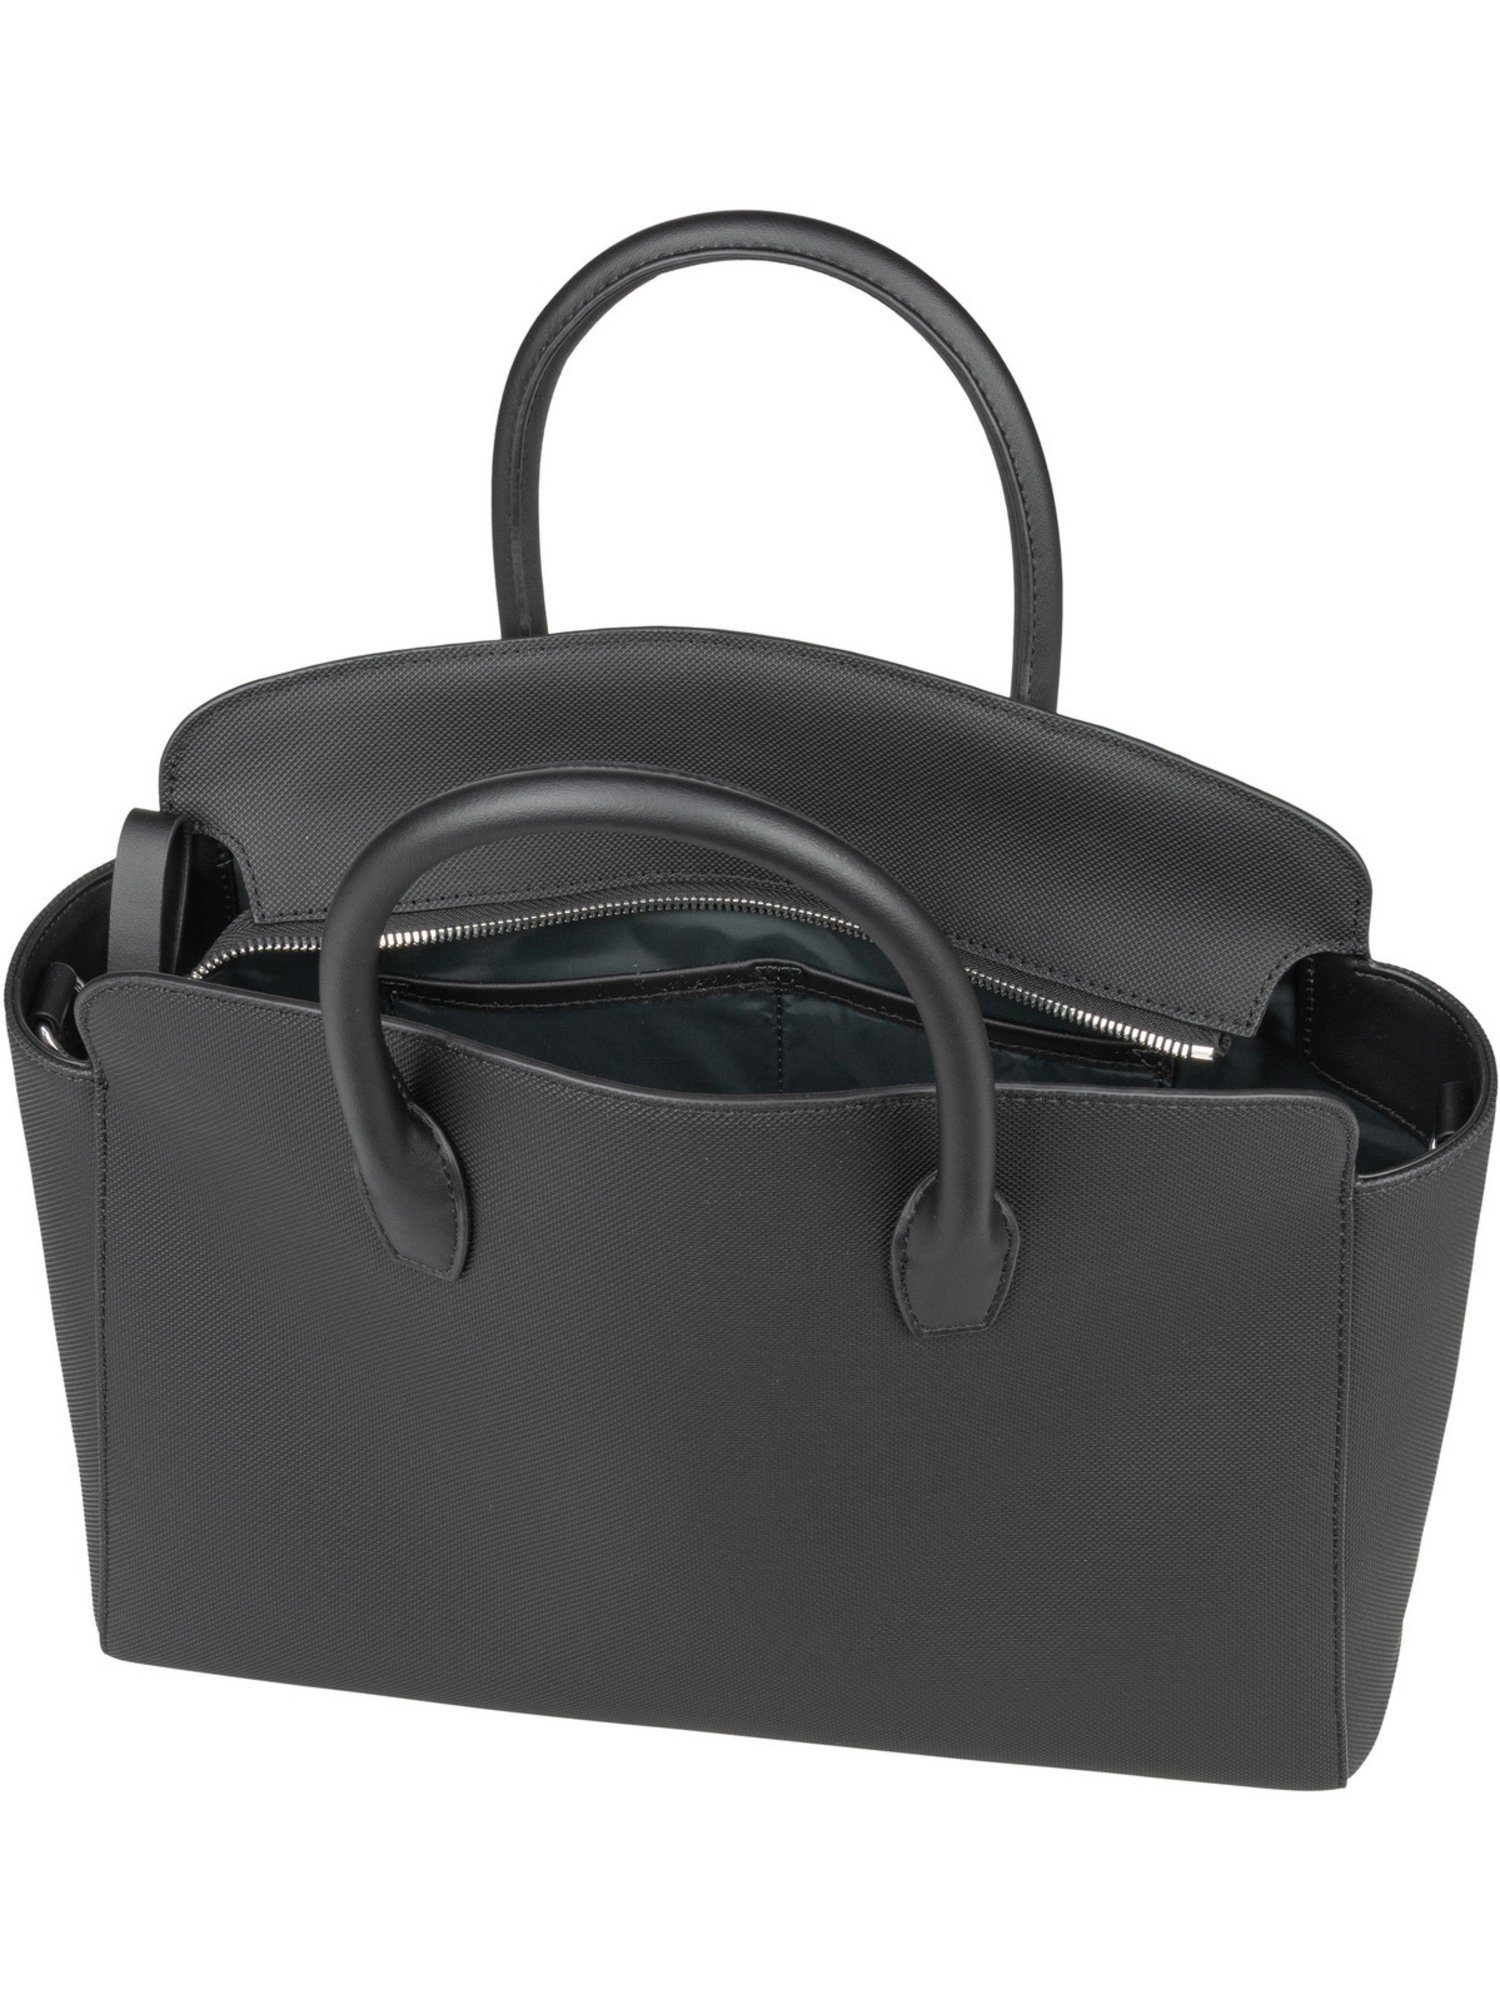 Lacoste Handtasche Daily Handle Bag 4092, Top M Lifestyle Tote Bag